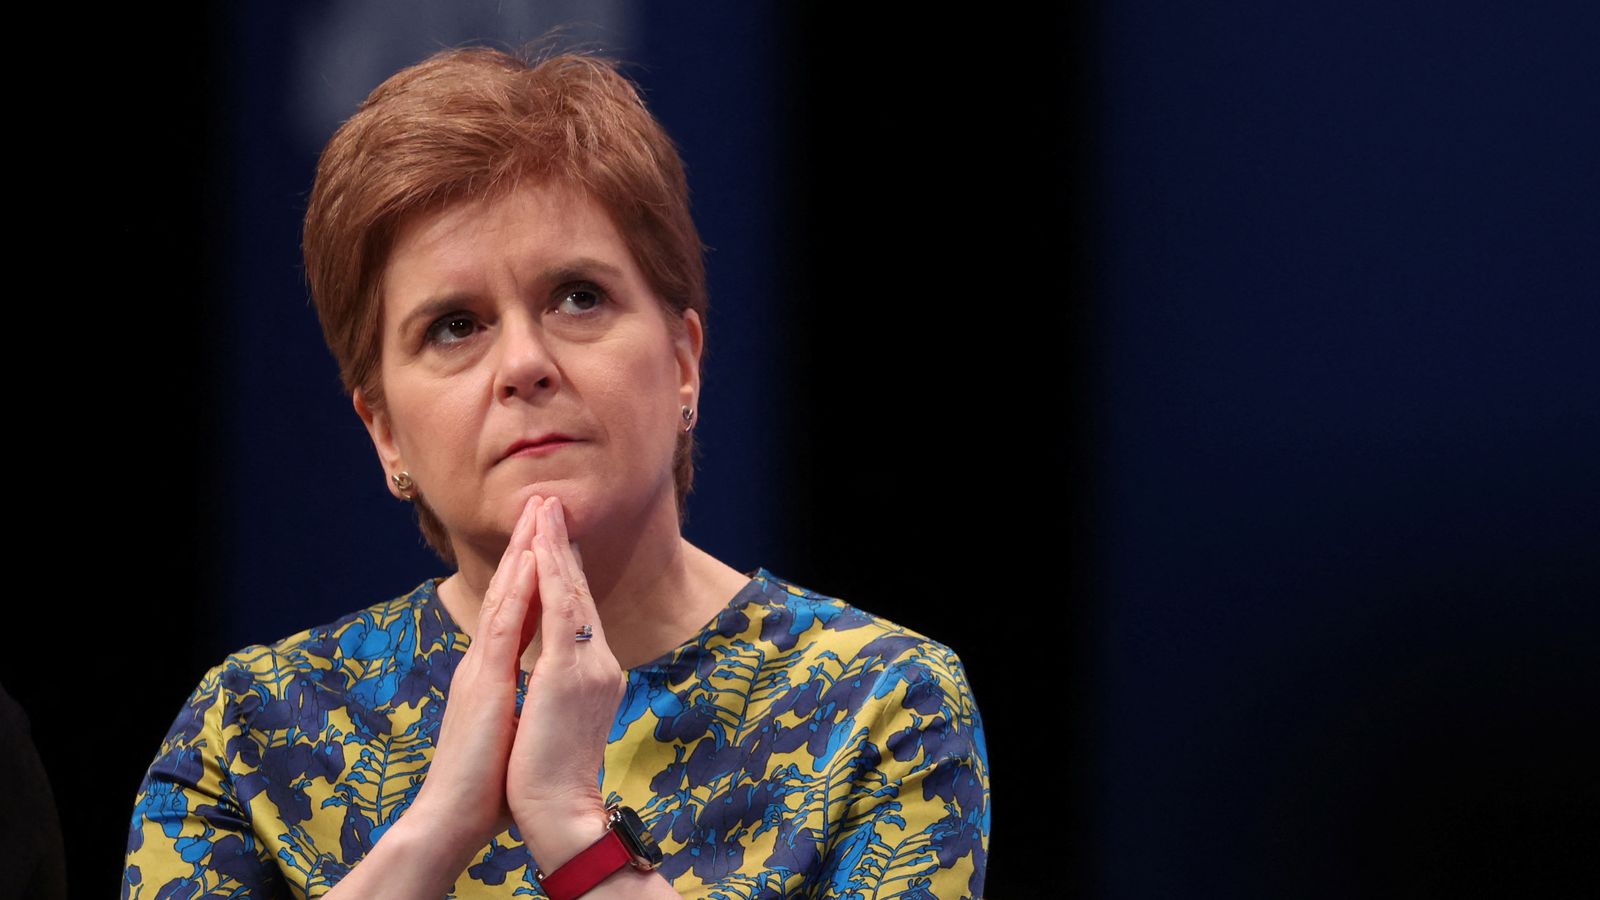 Scottish independence will create partnership of equals in the UK, Sturgeon to say